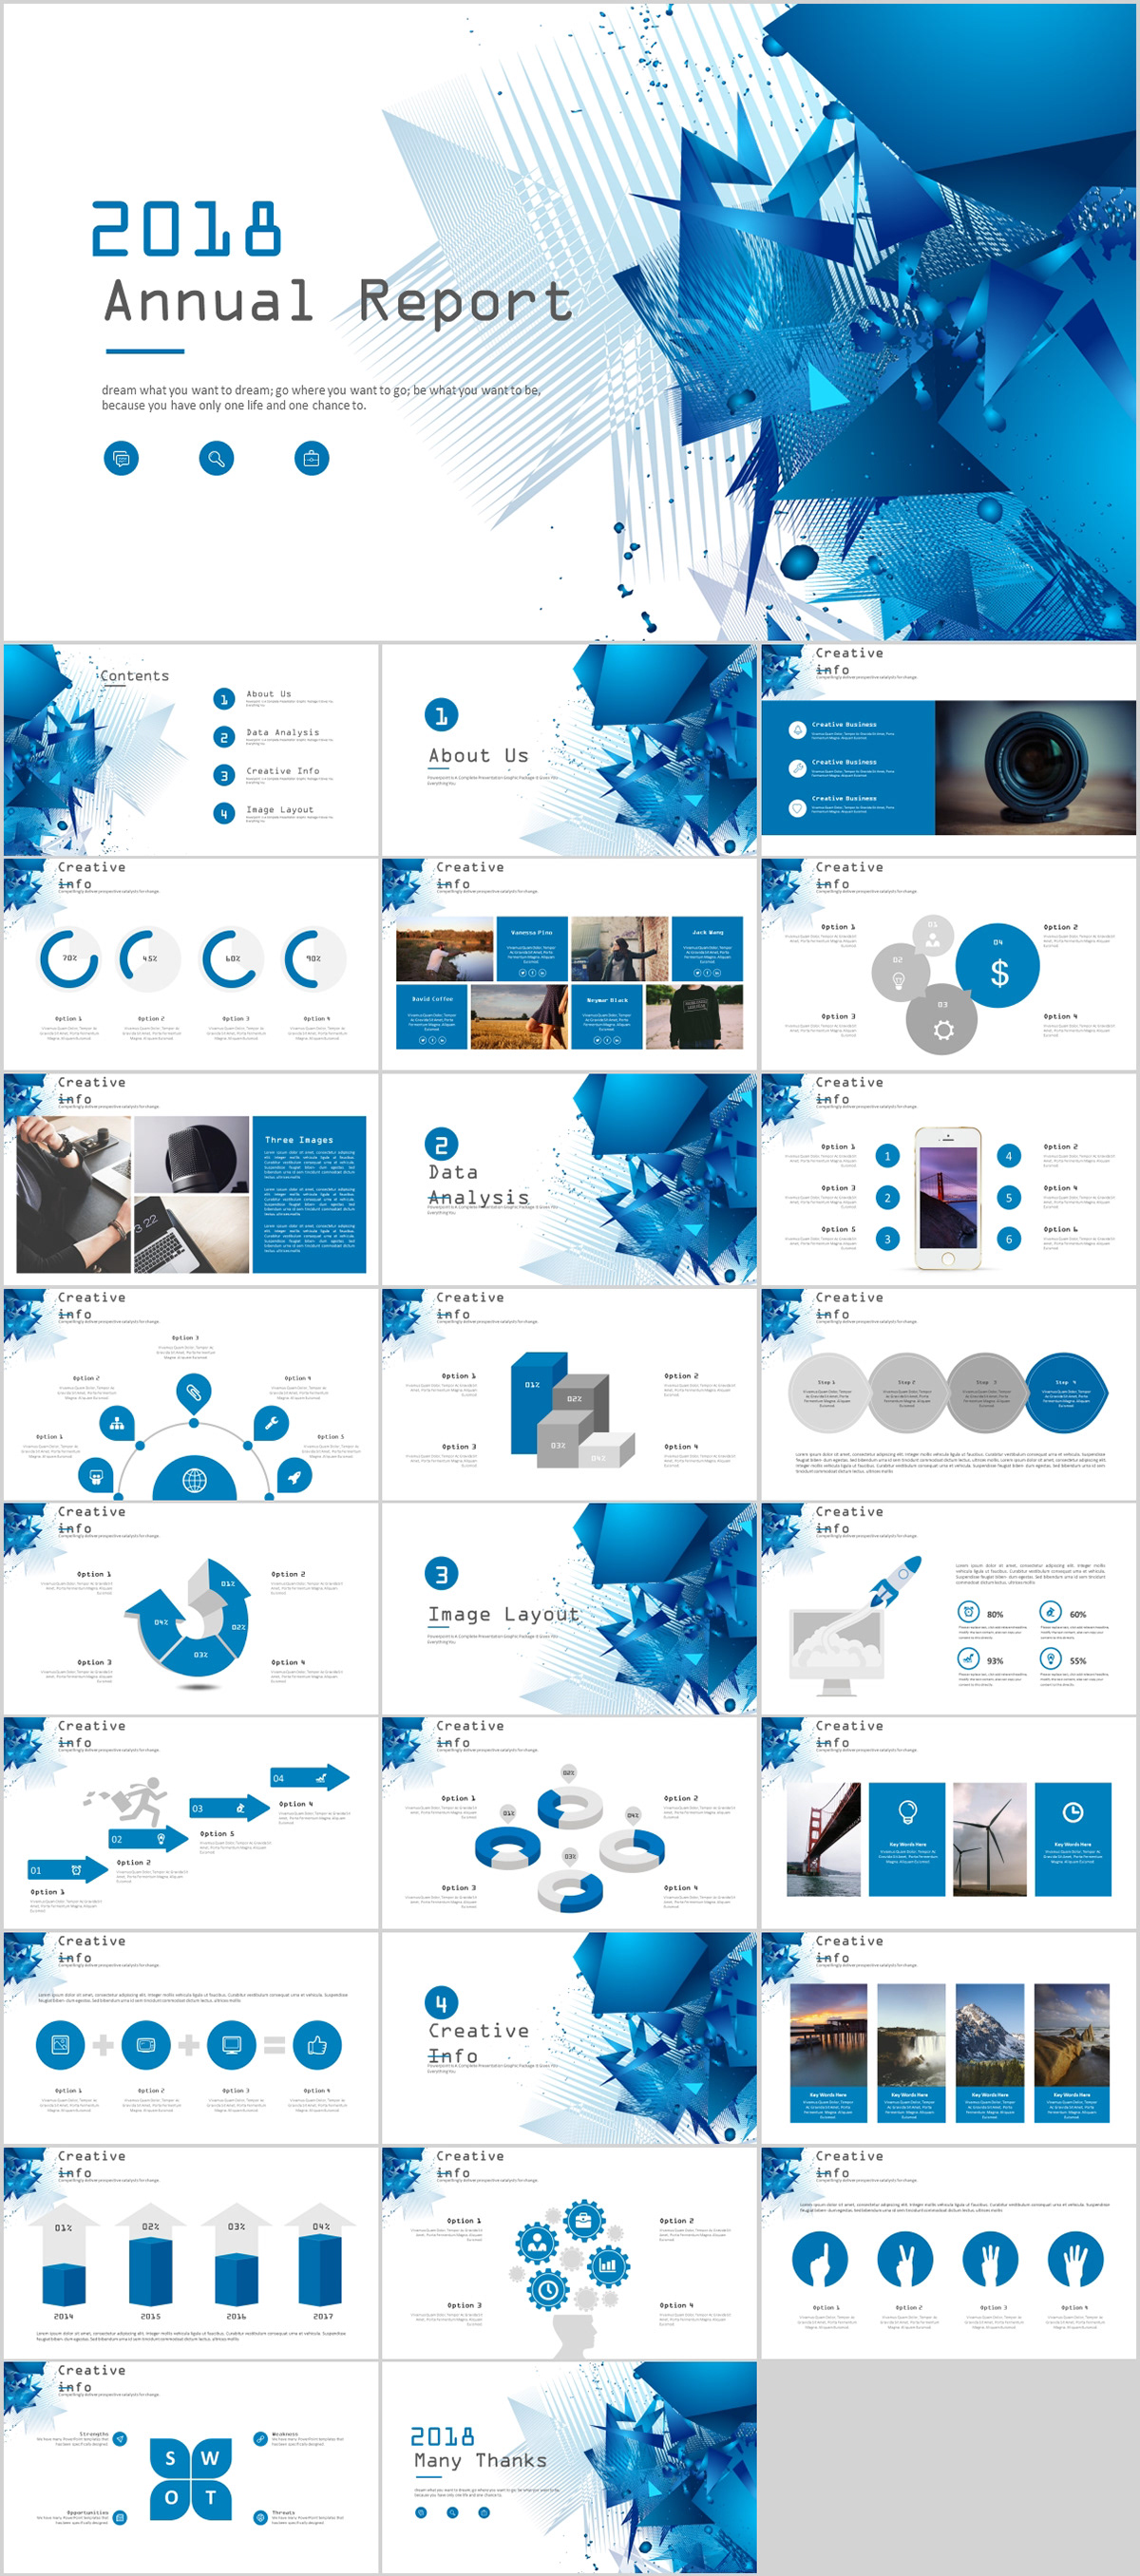 annual report powerpoint template www.pptwork.com